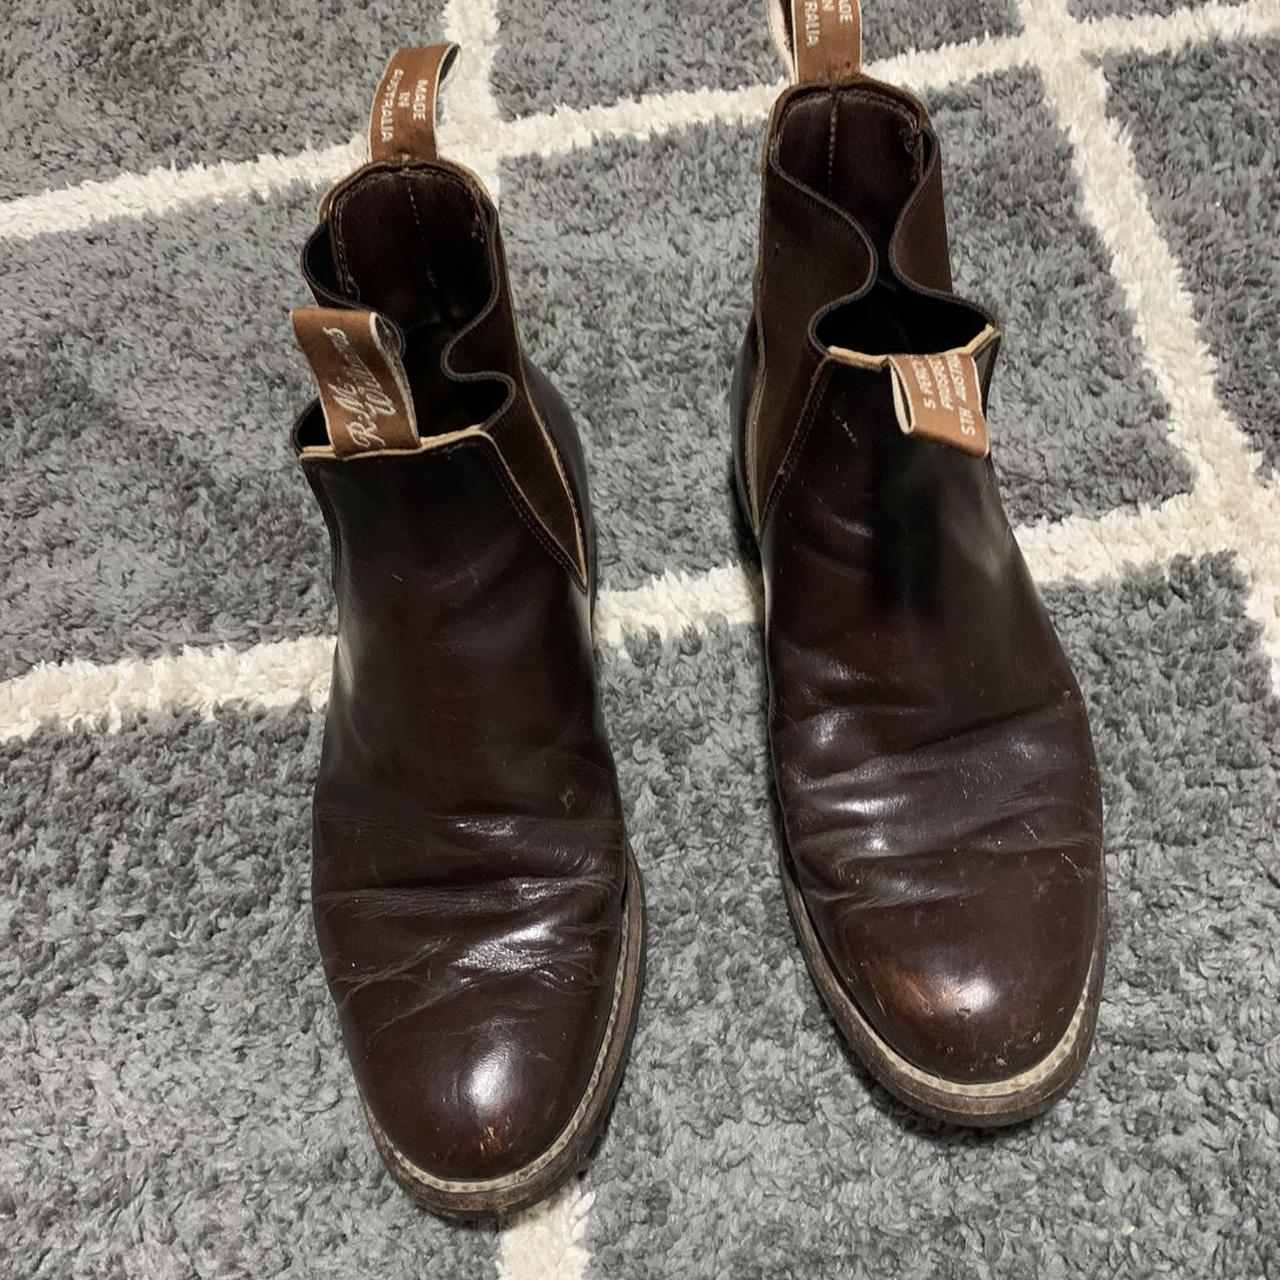 RM Williams MENS boots size 9.5 wide fit (sizing is... - Depop